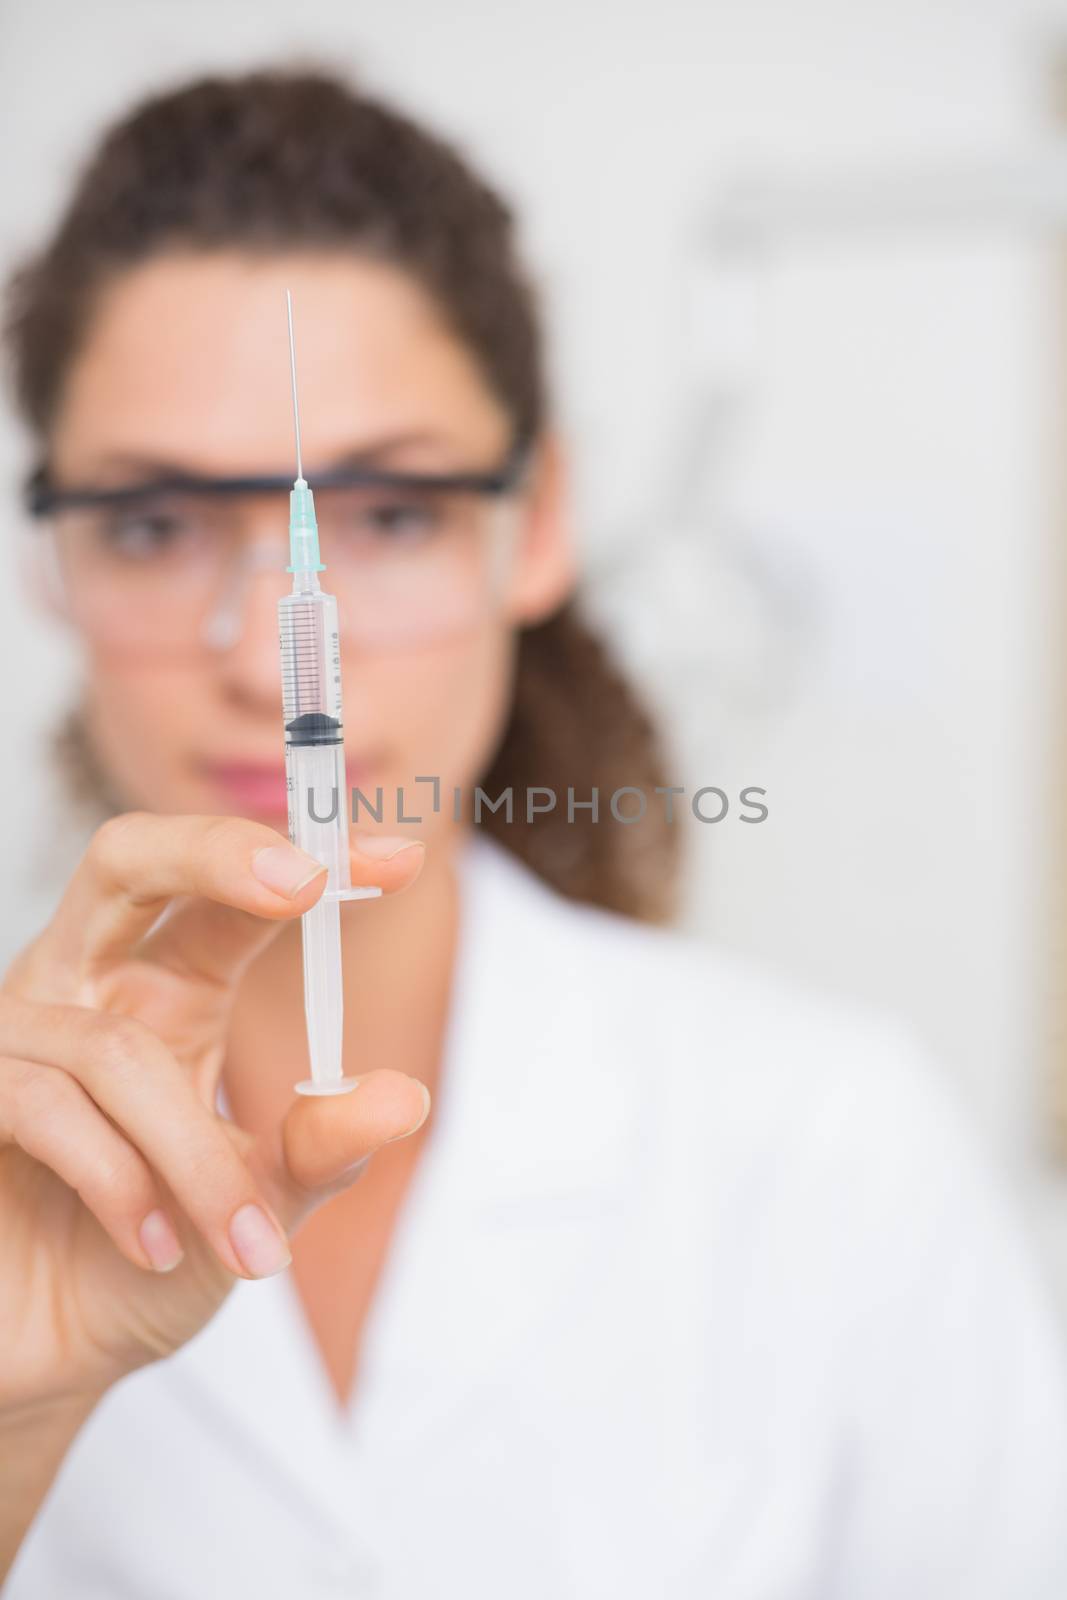 Dental assistant preparing an injection by Wavebreakmedia